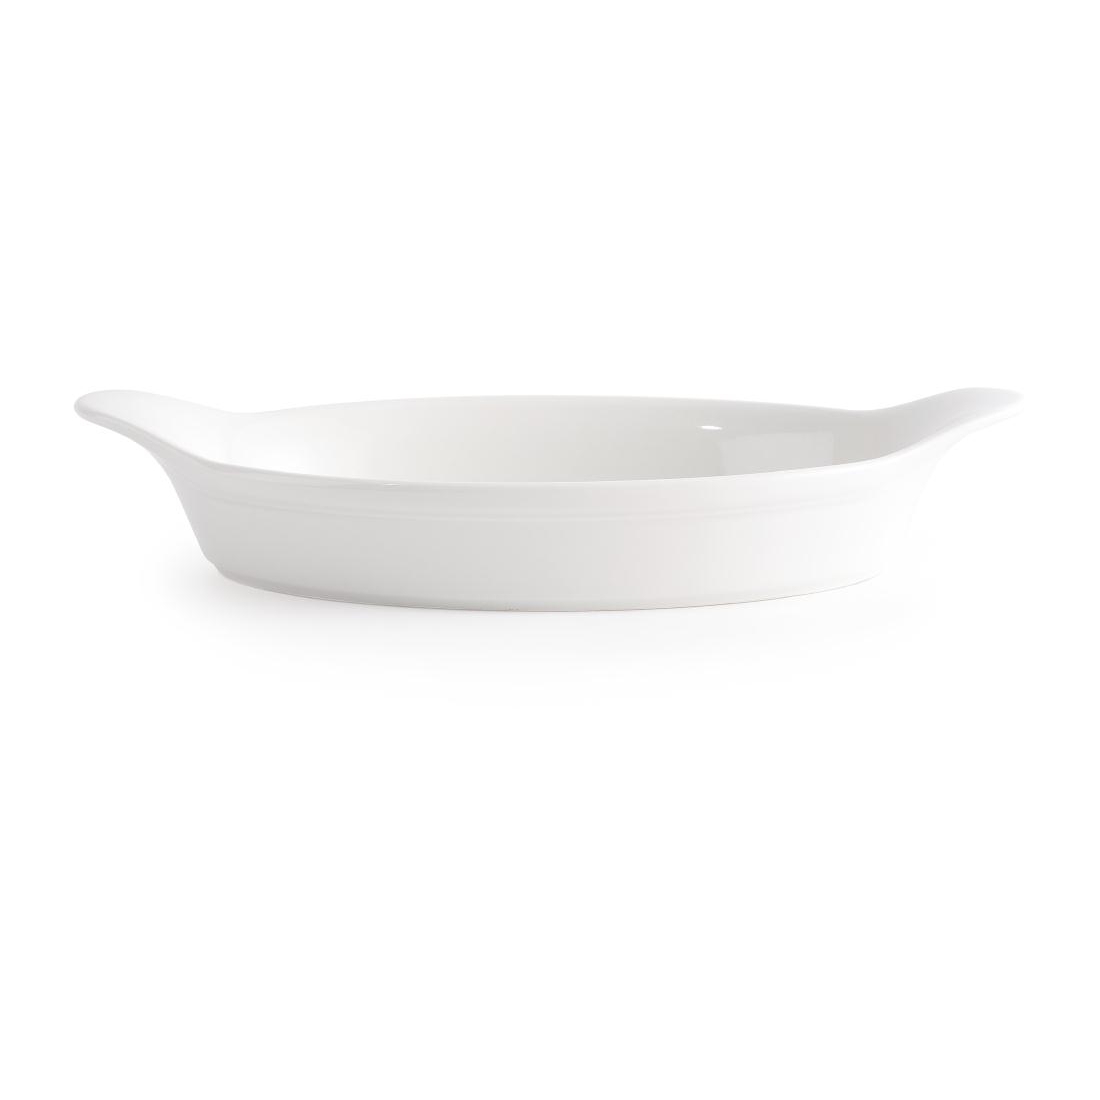 Churchill Oval Eared Dishes 160mm